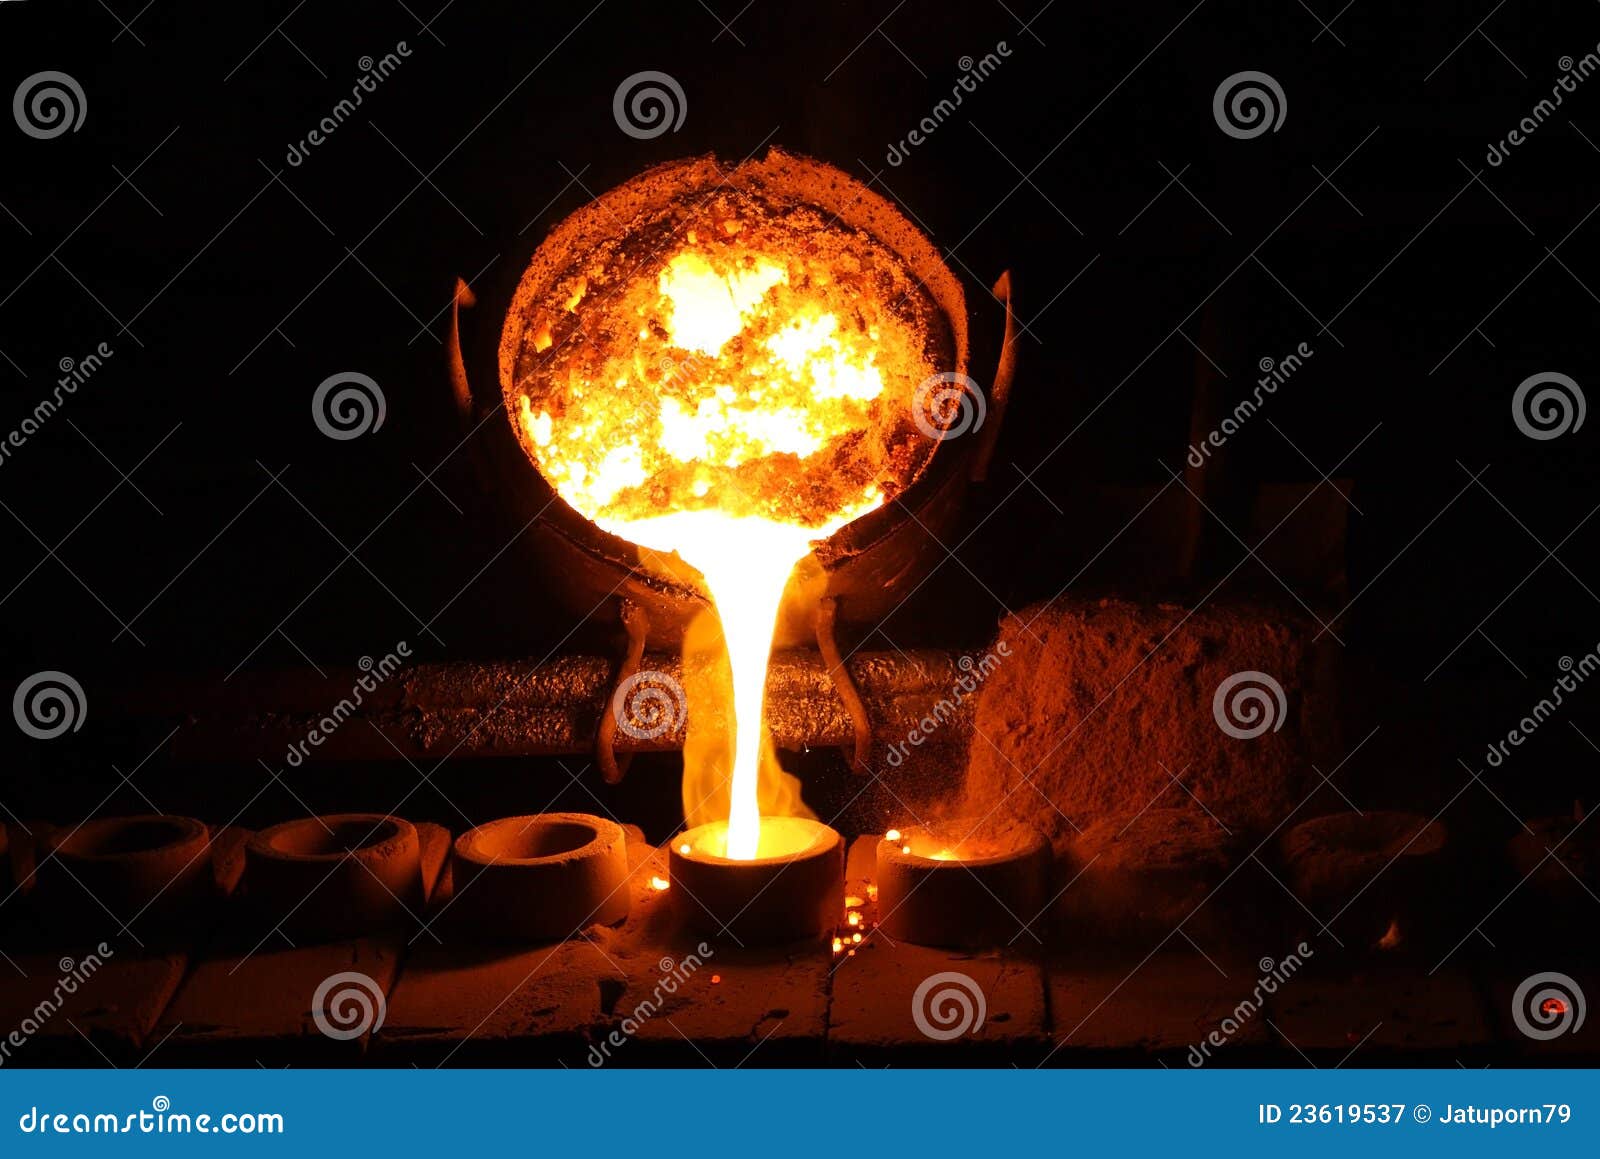 foundry - molten metal poured from ladle